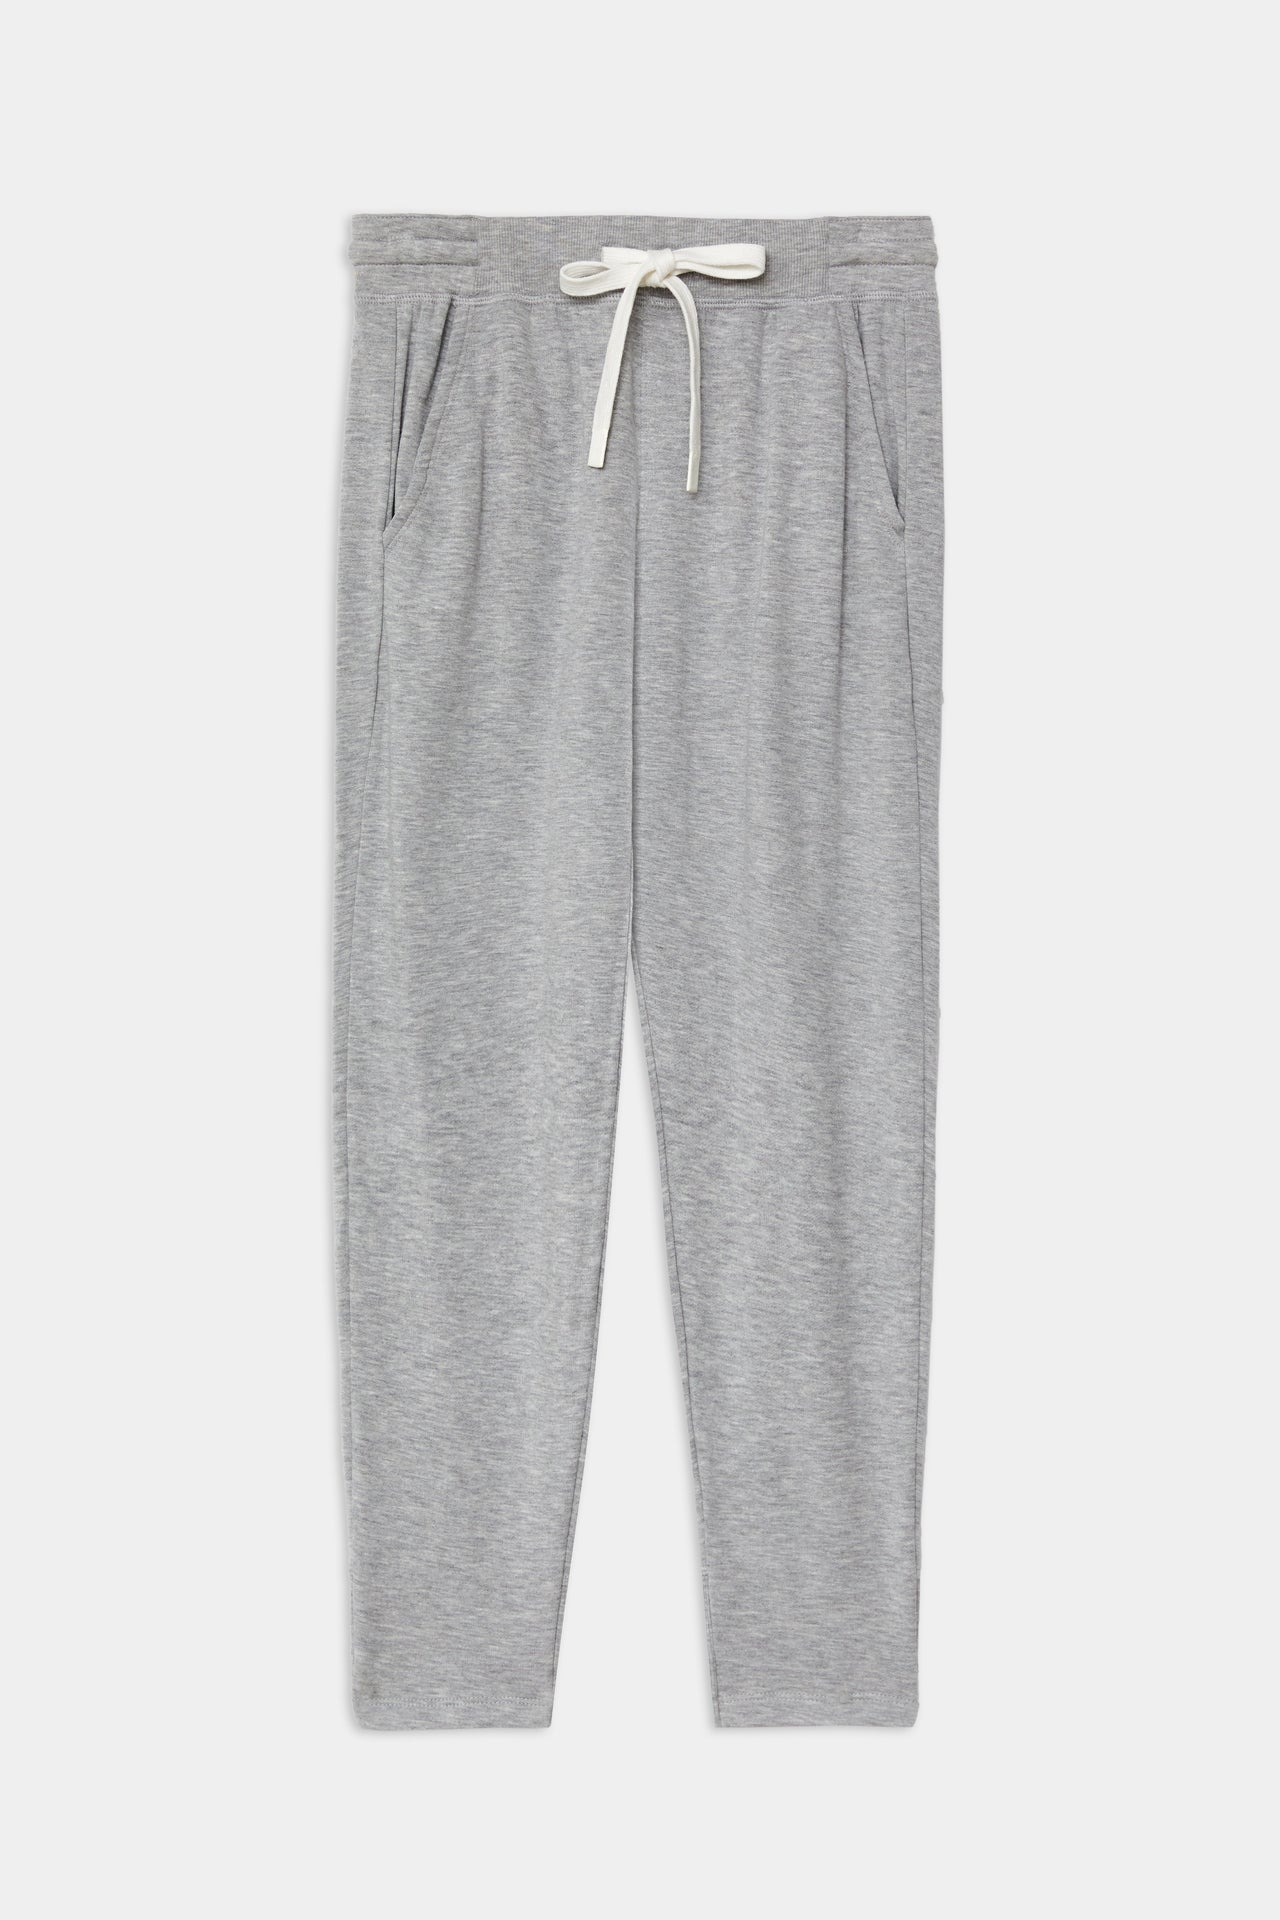 Front flat view of a light pale tone gray sweatpant with tapered leg and above ankle length with white drawstring and side hip pockets